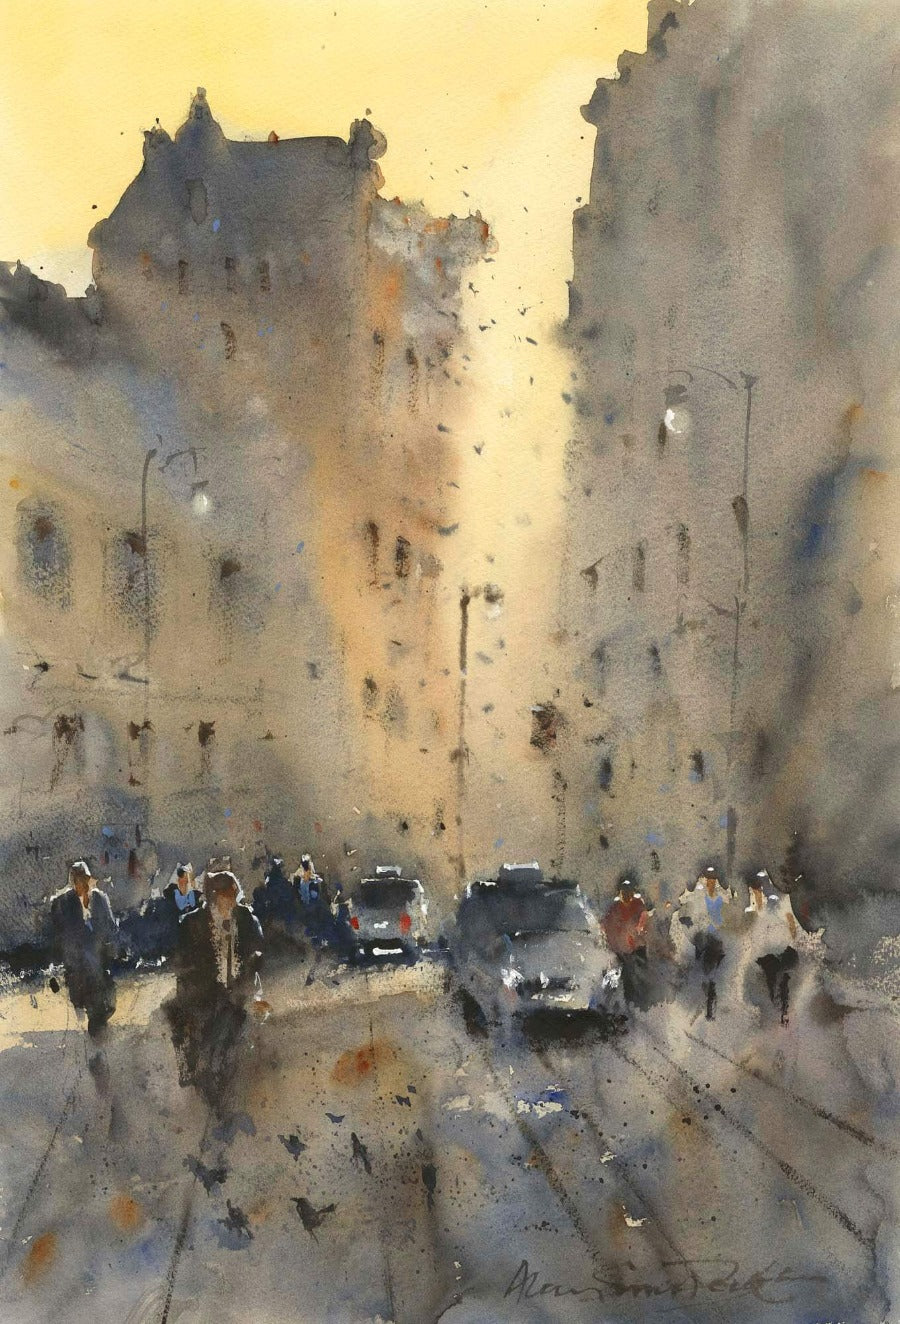 King Street Quayside by Alan Smith Page, an original watercolour painting of a Newcastle street scene. | Original art for sale at The Biscuit Factory Newcastle